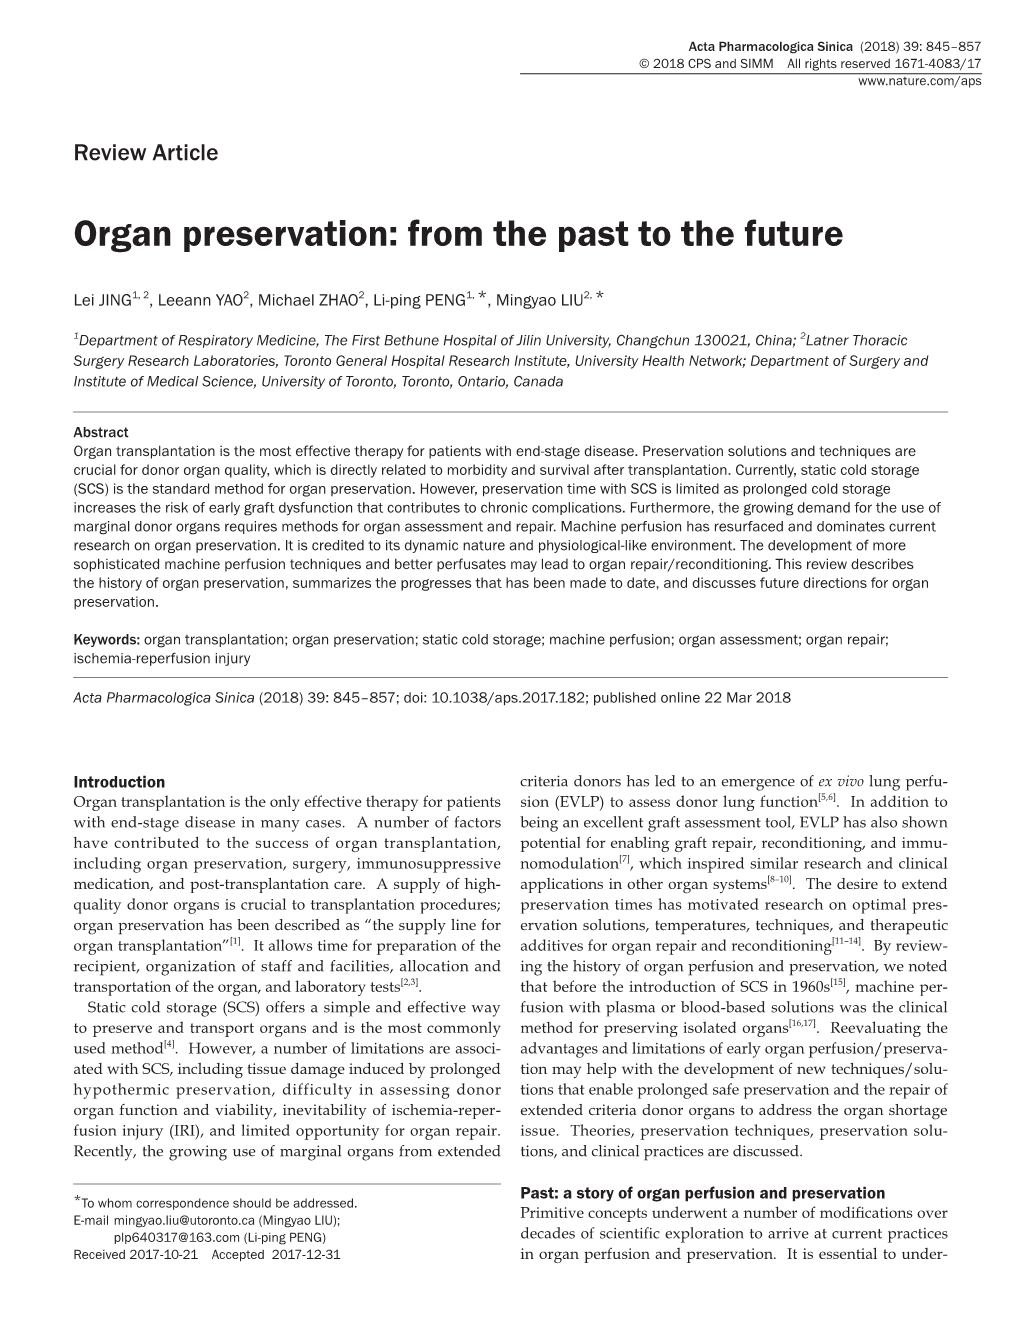 Organ Preservation: from the Past to the Future